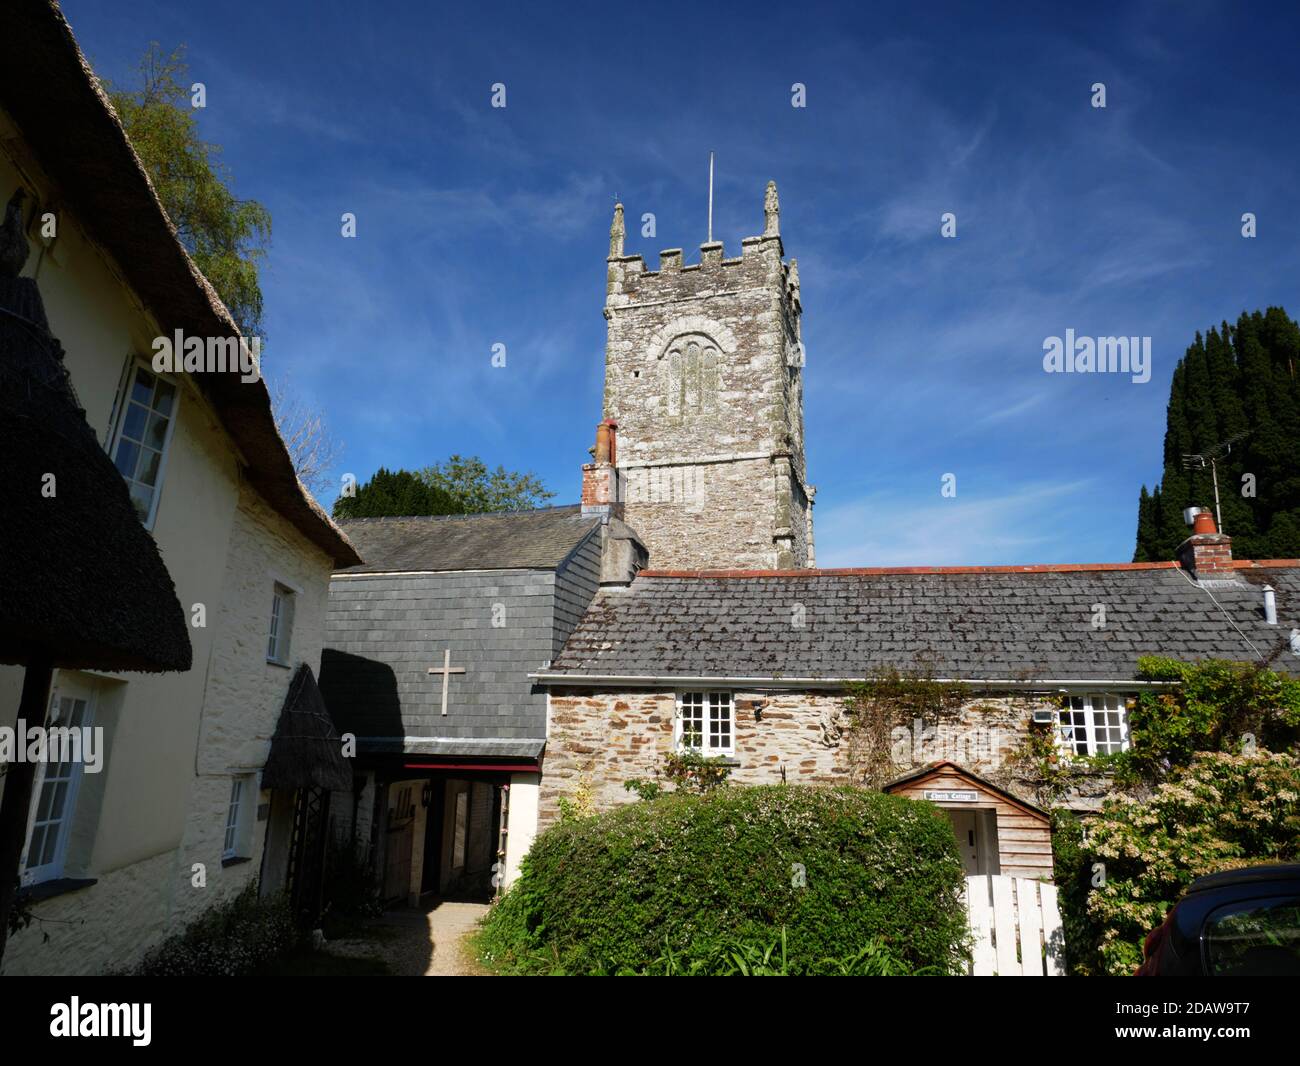 Cottages and church at St Clements, Truro, Cornwall. Stock Photo